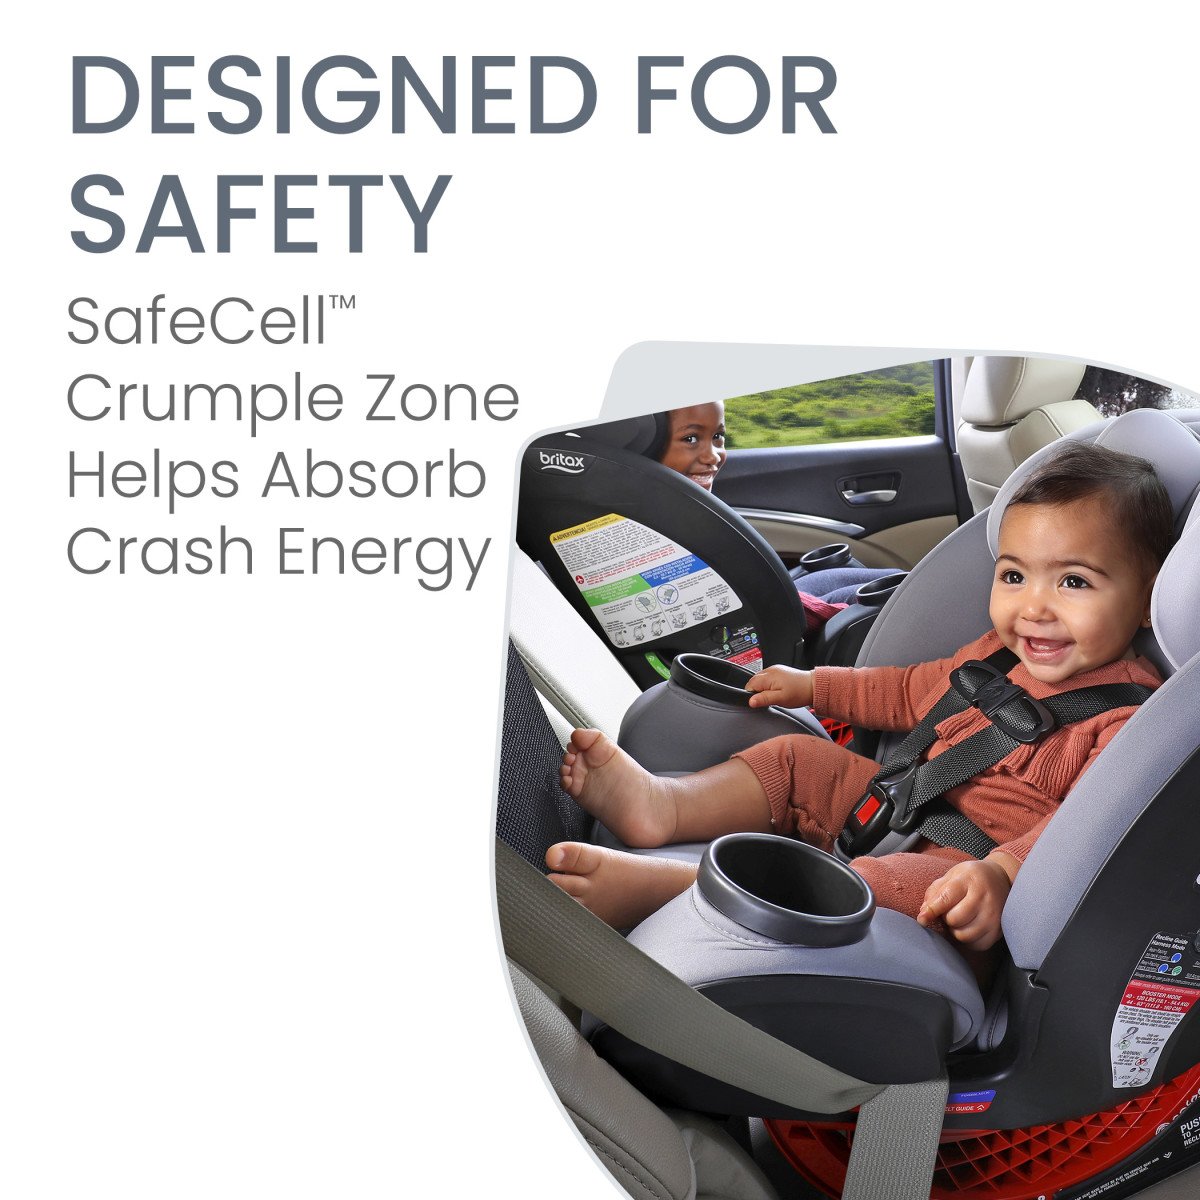 Designed for Safety SafeCell Crumple Zone helps absorb crash energy (Copy)